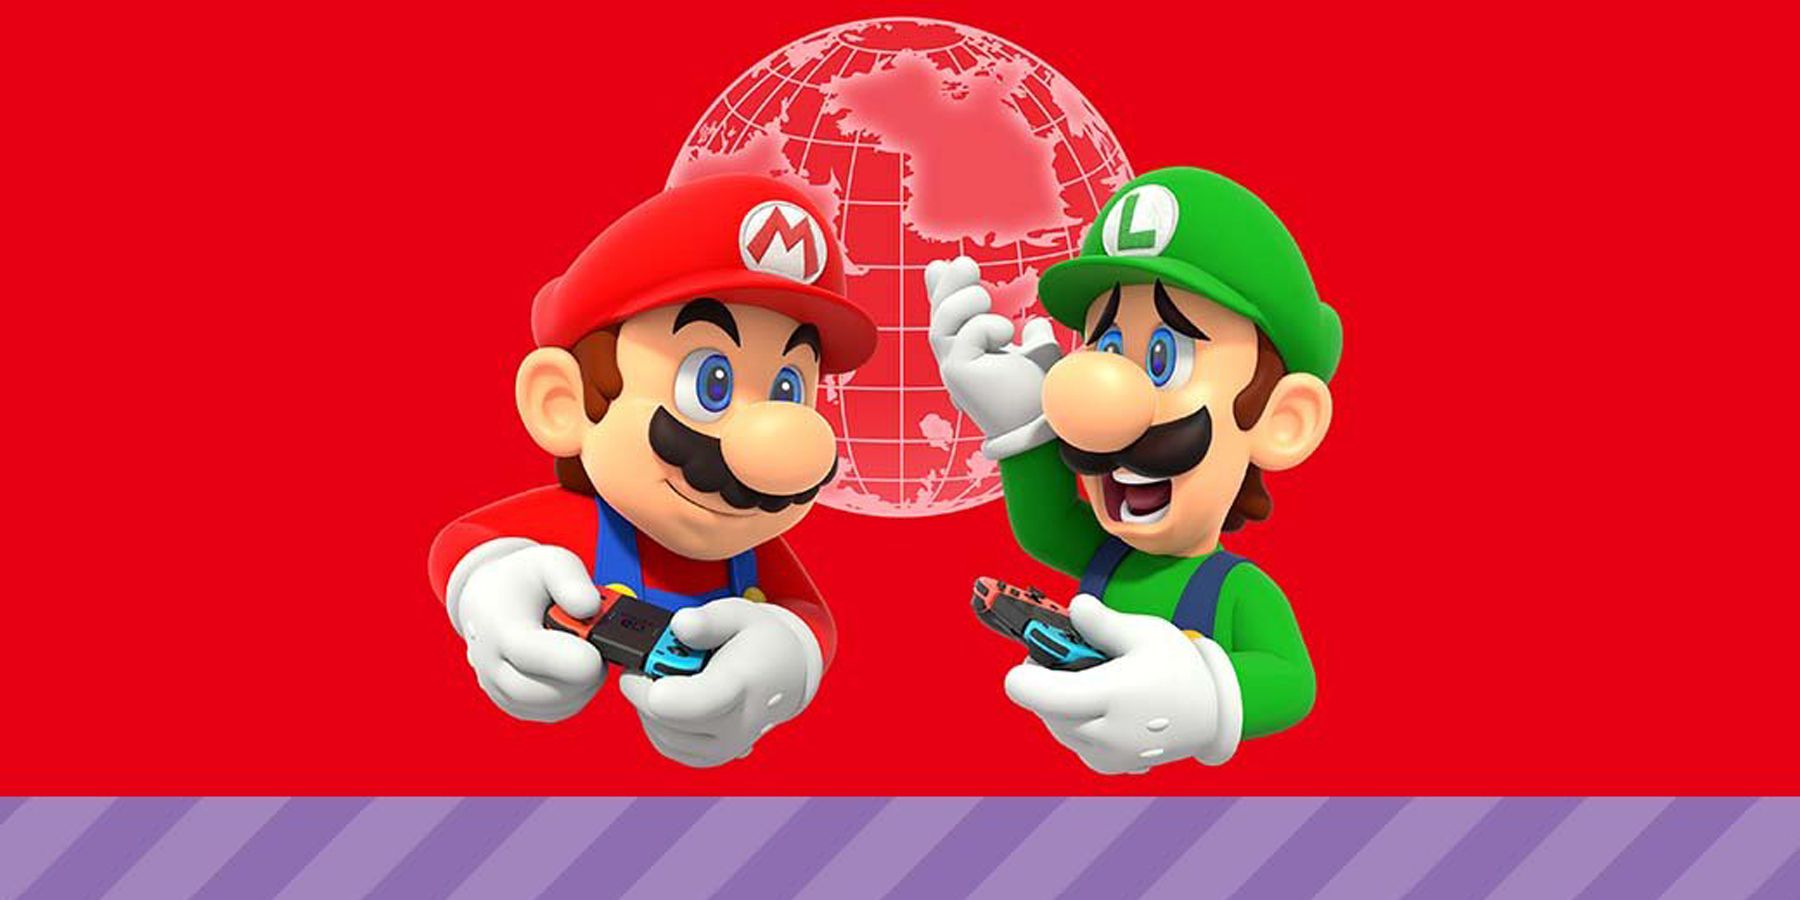 Nintendo Switch Online Adds Three Super Mario Games to Expansion